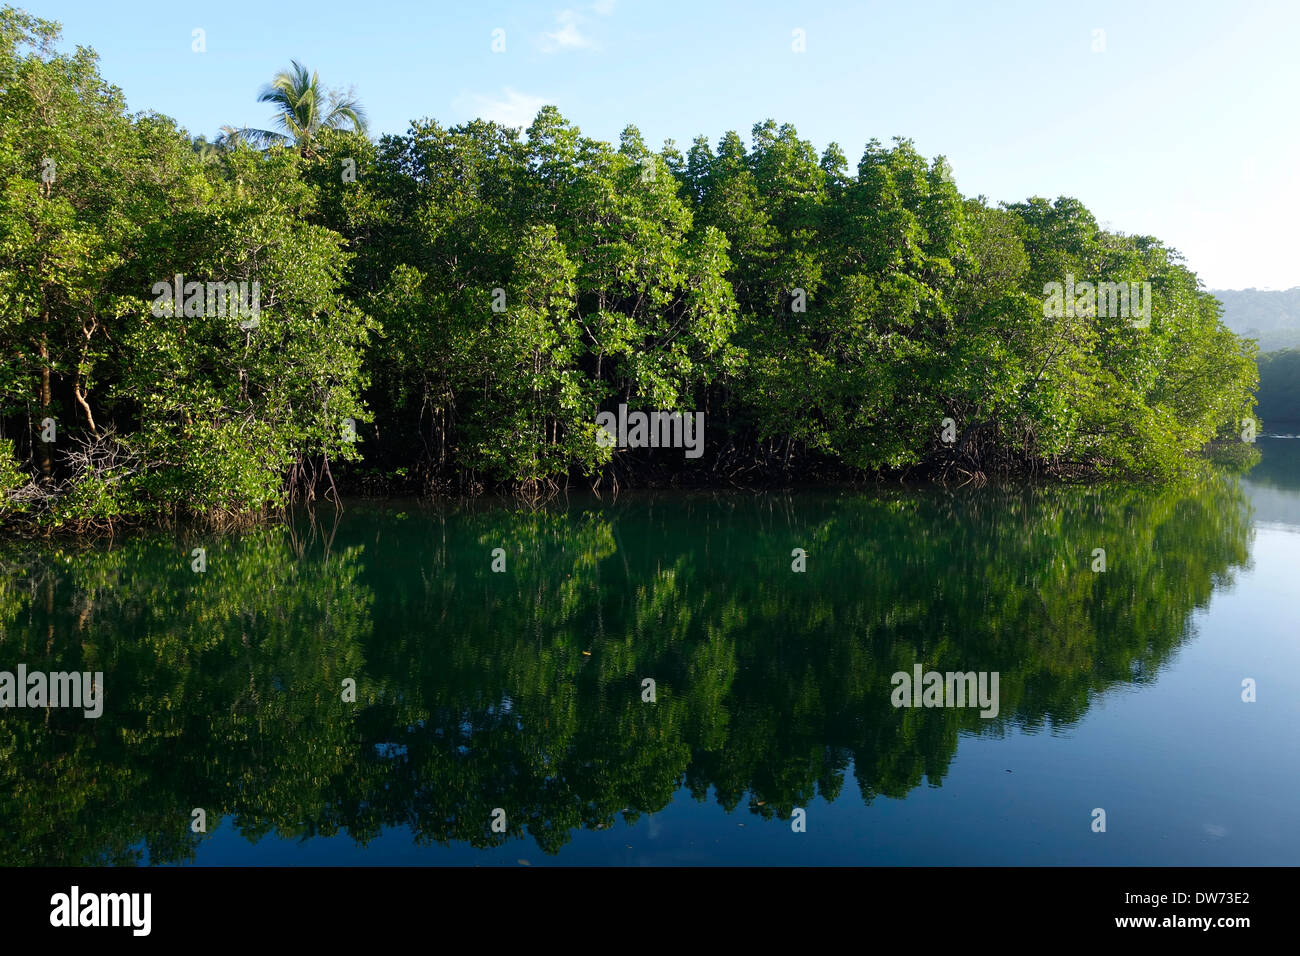 Mangrove forest in an intertidal zone of Koh Kood, Thailand. Stock Photo